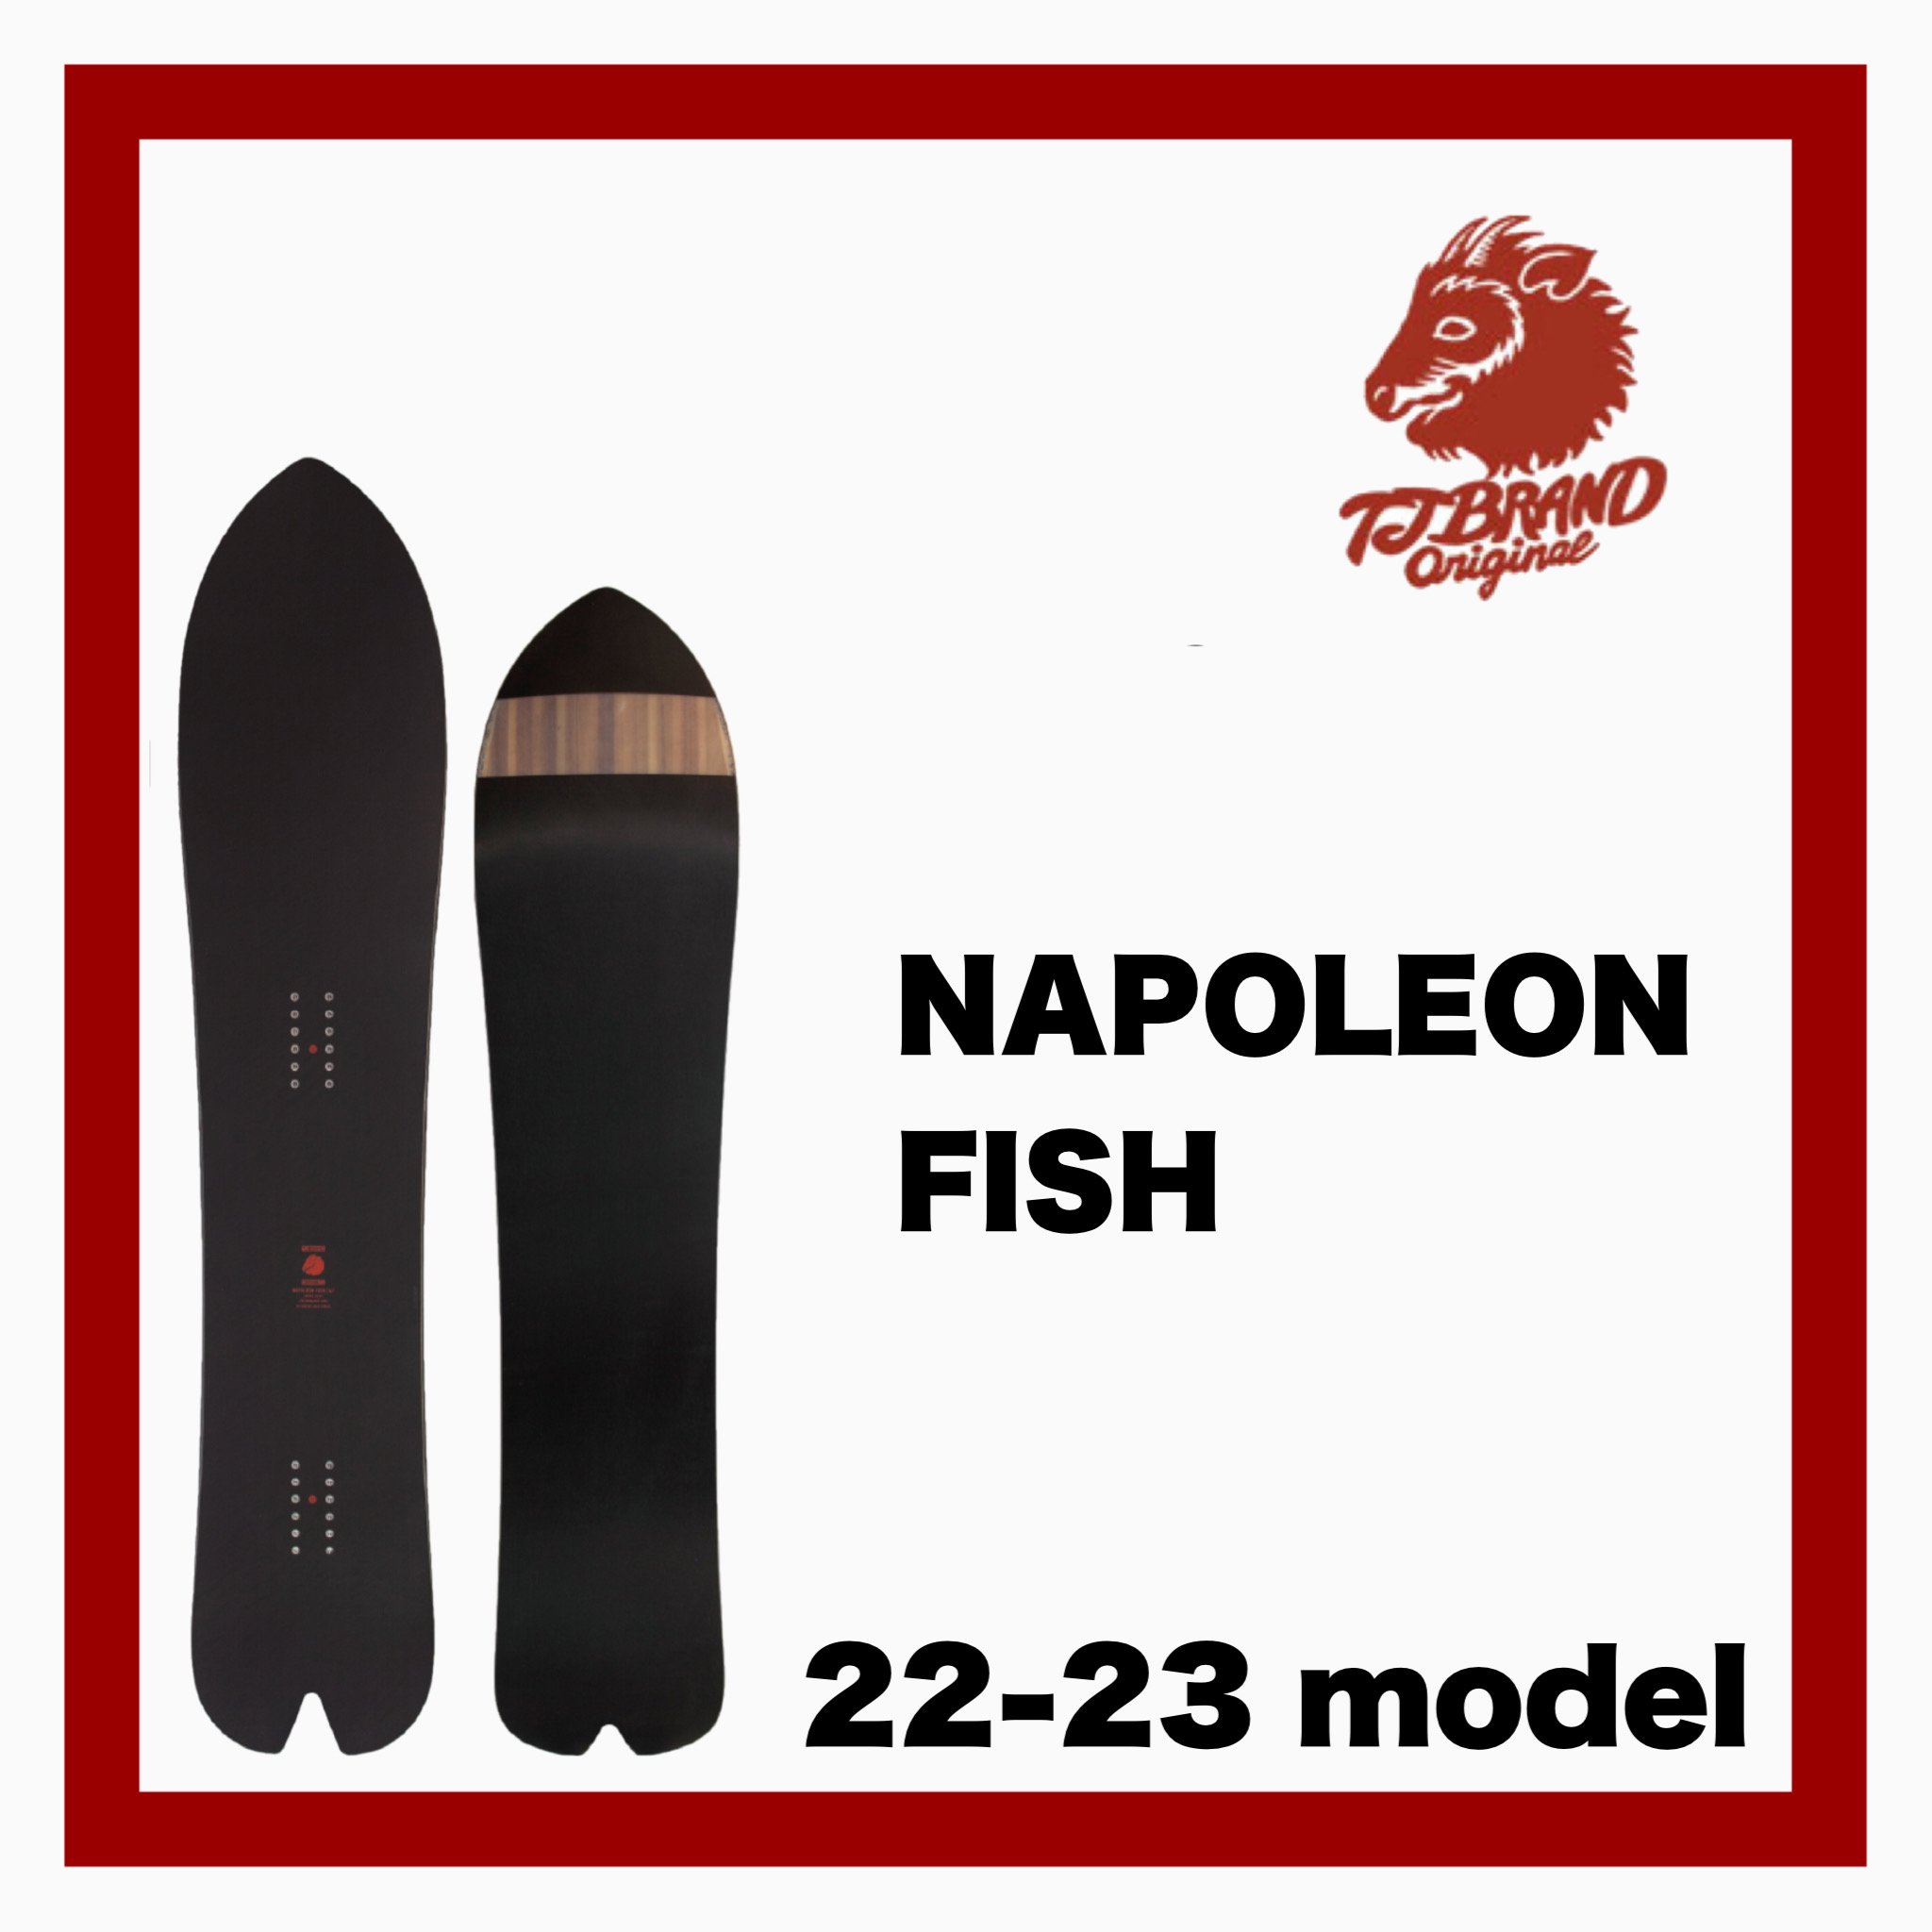 <img class='new_mark_img1' src='https://img.shop-pro.jp/img/new/icons24.gif' style='border:none;display:inline;margin:0px;padding:0px;width:auto;' />T.J BRAND NAPOLEON FISH